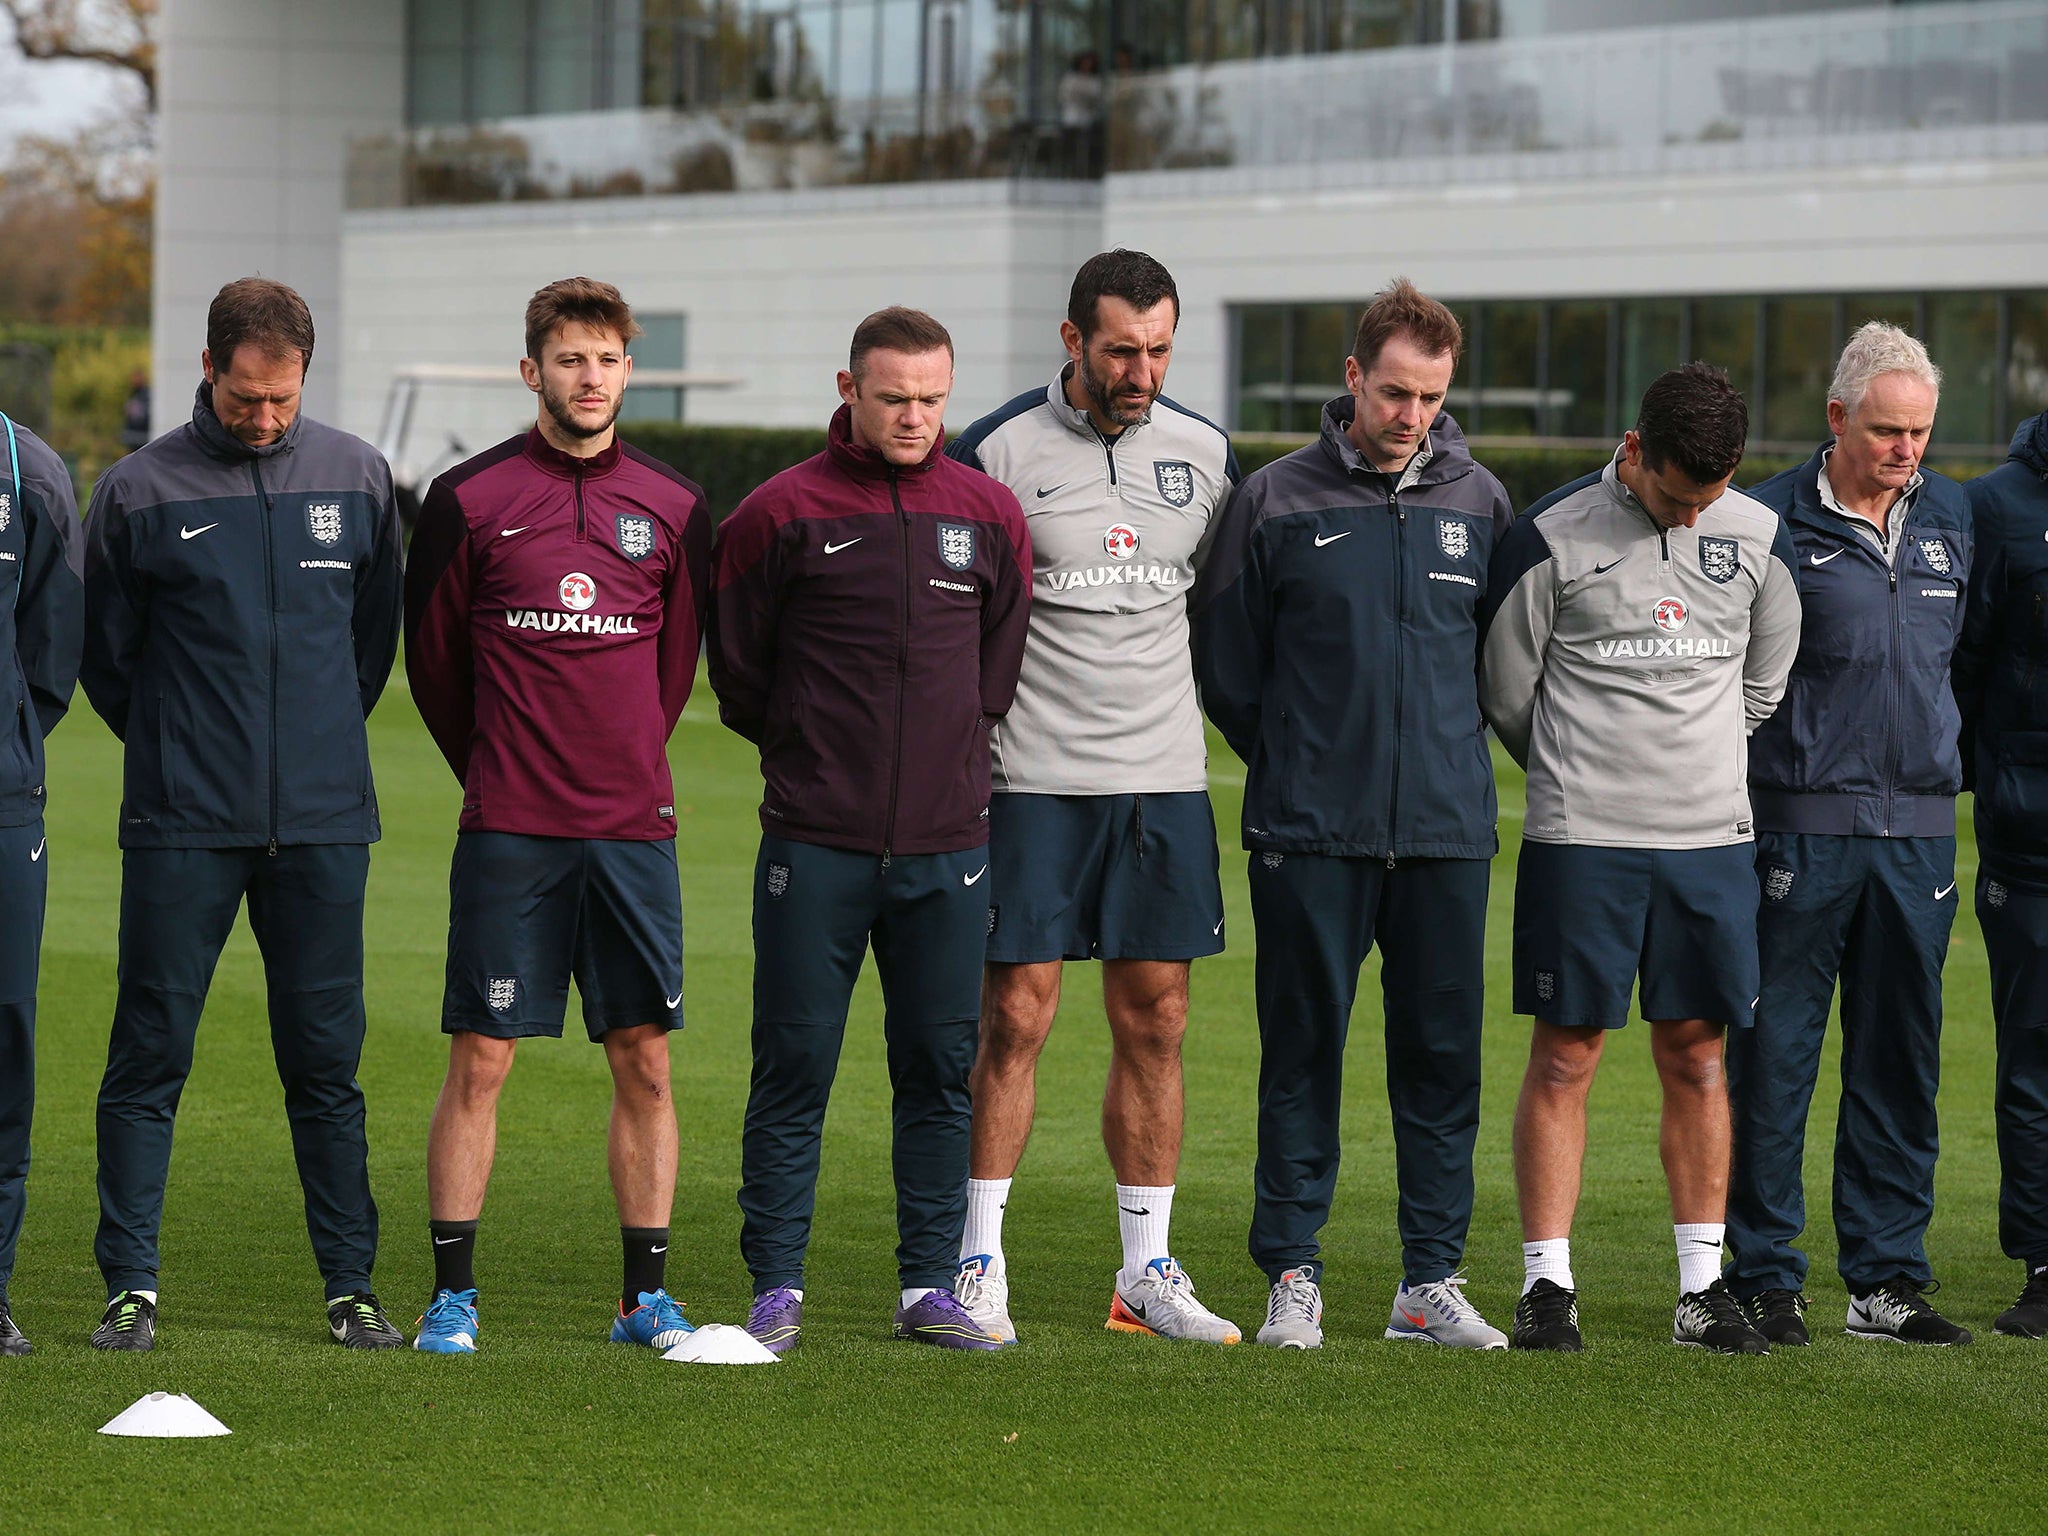 England players and coaches observe a minute of silence in tribute to victims of the November 13 Paris attacks during a team training session at Tottenham Hotspur Training Centre in London